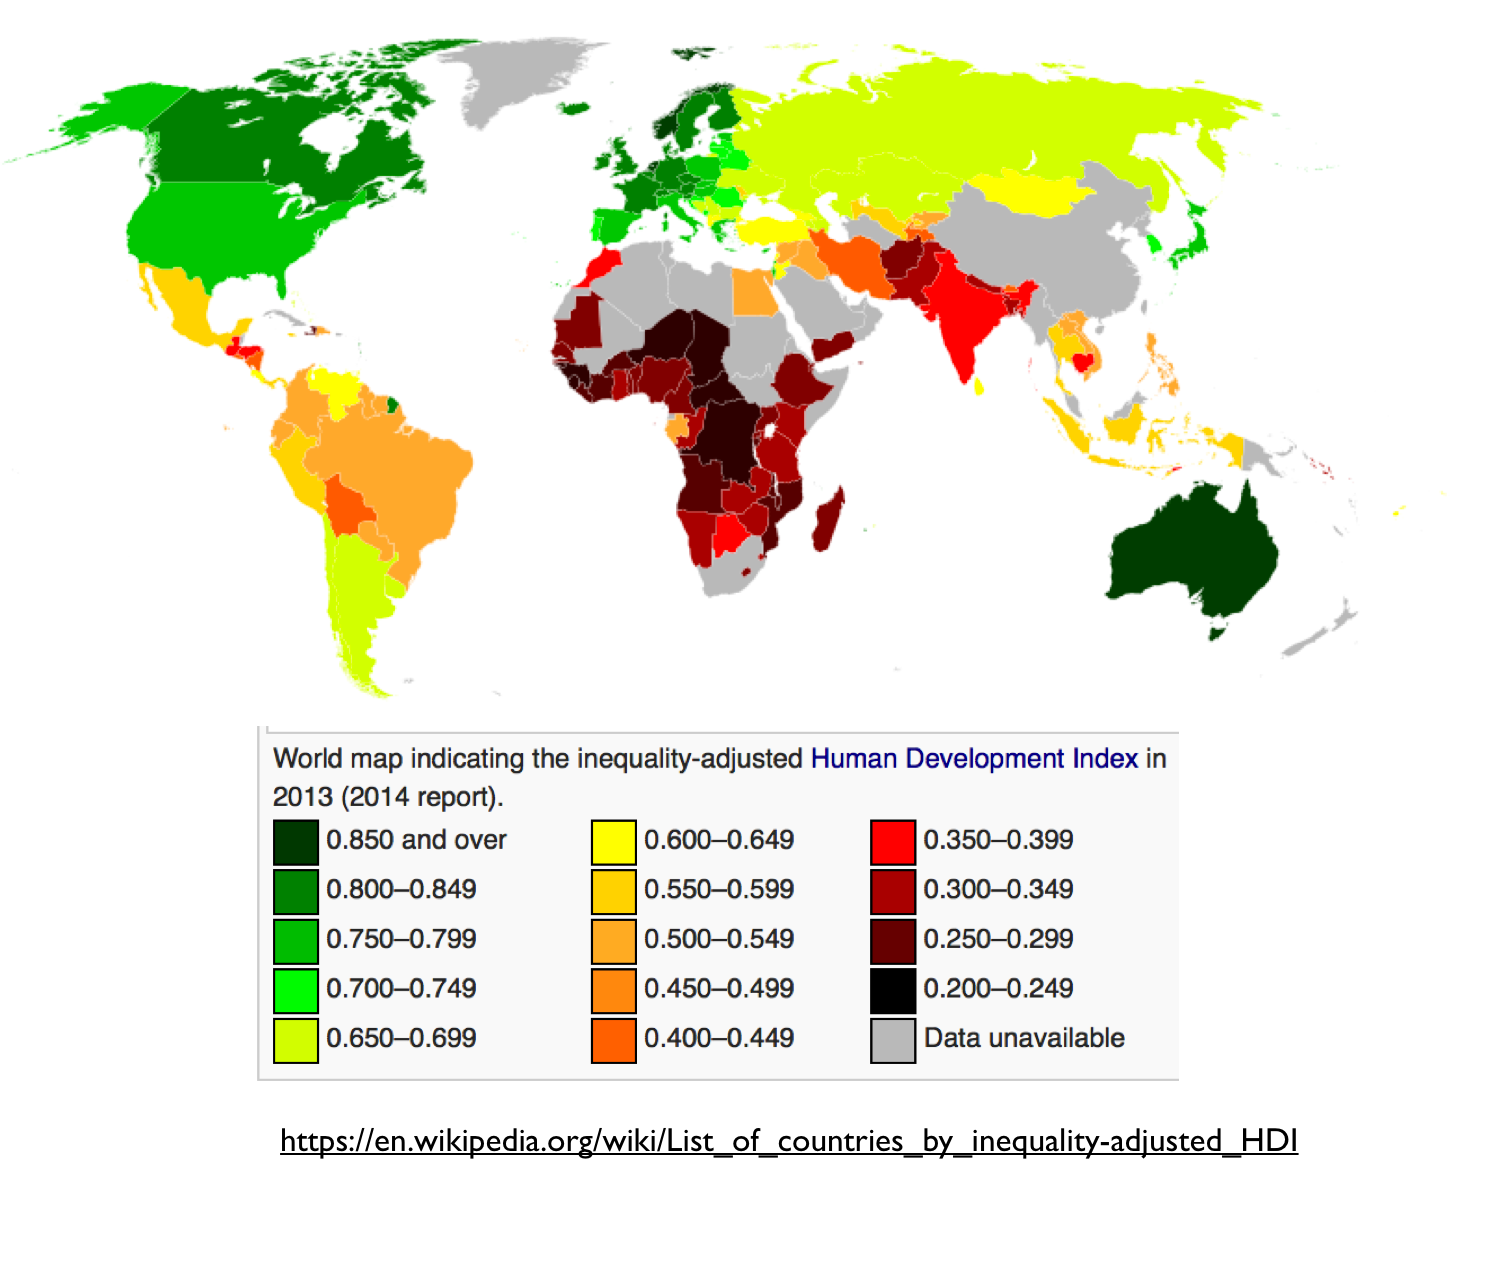 Image result for hdi (http://www.geocurrents.info/wp-content/uploads/2015/09/HDI-Inequality-Adjusted-World-Map.png)